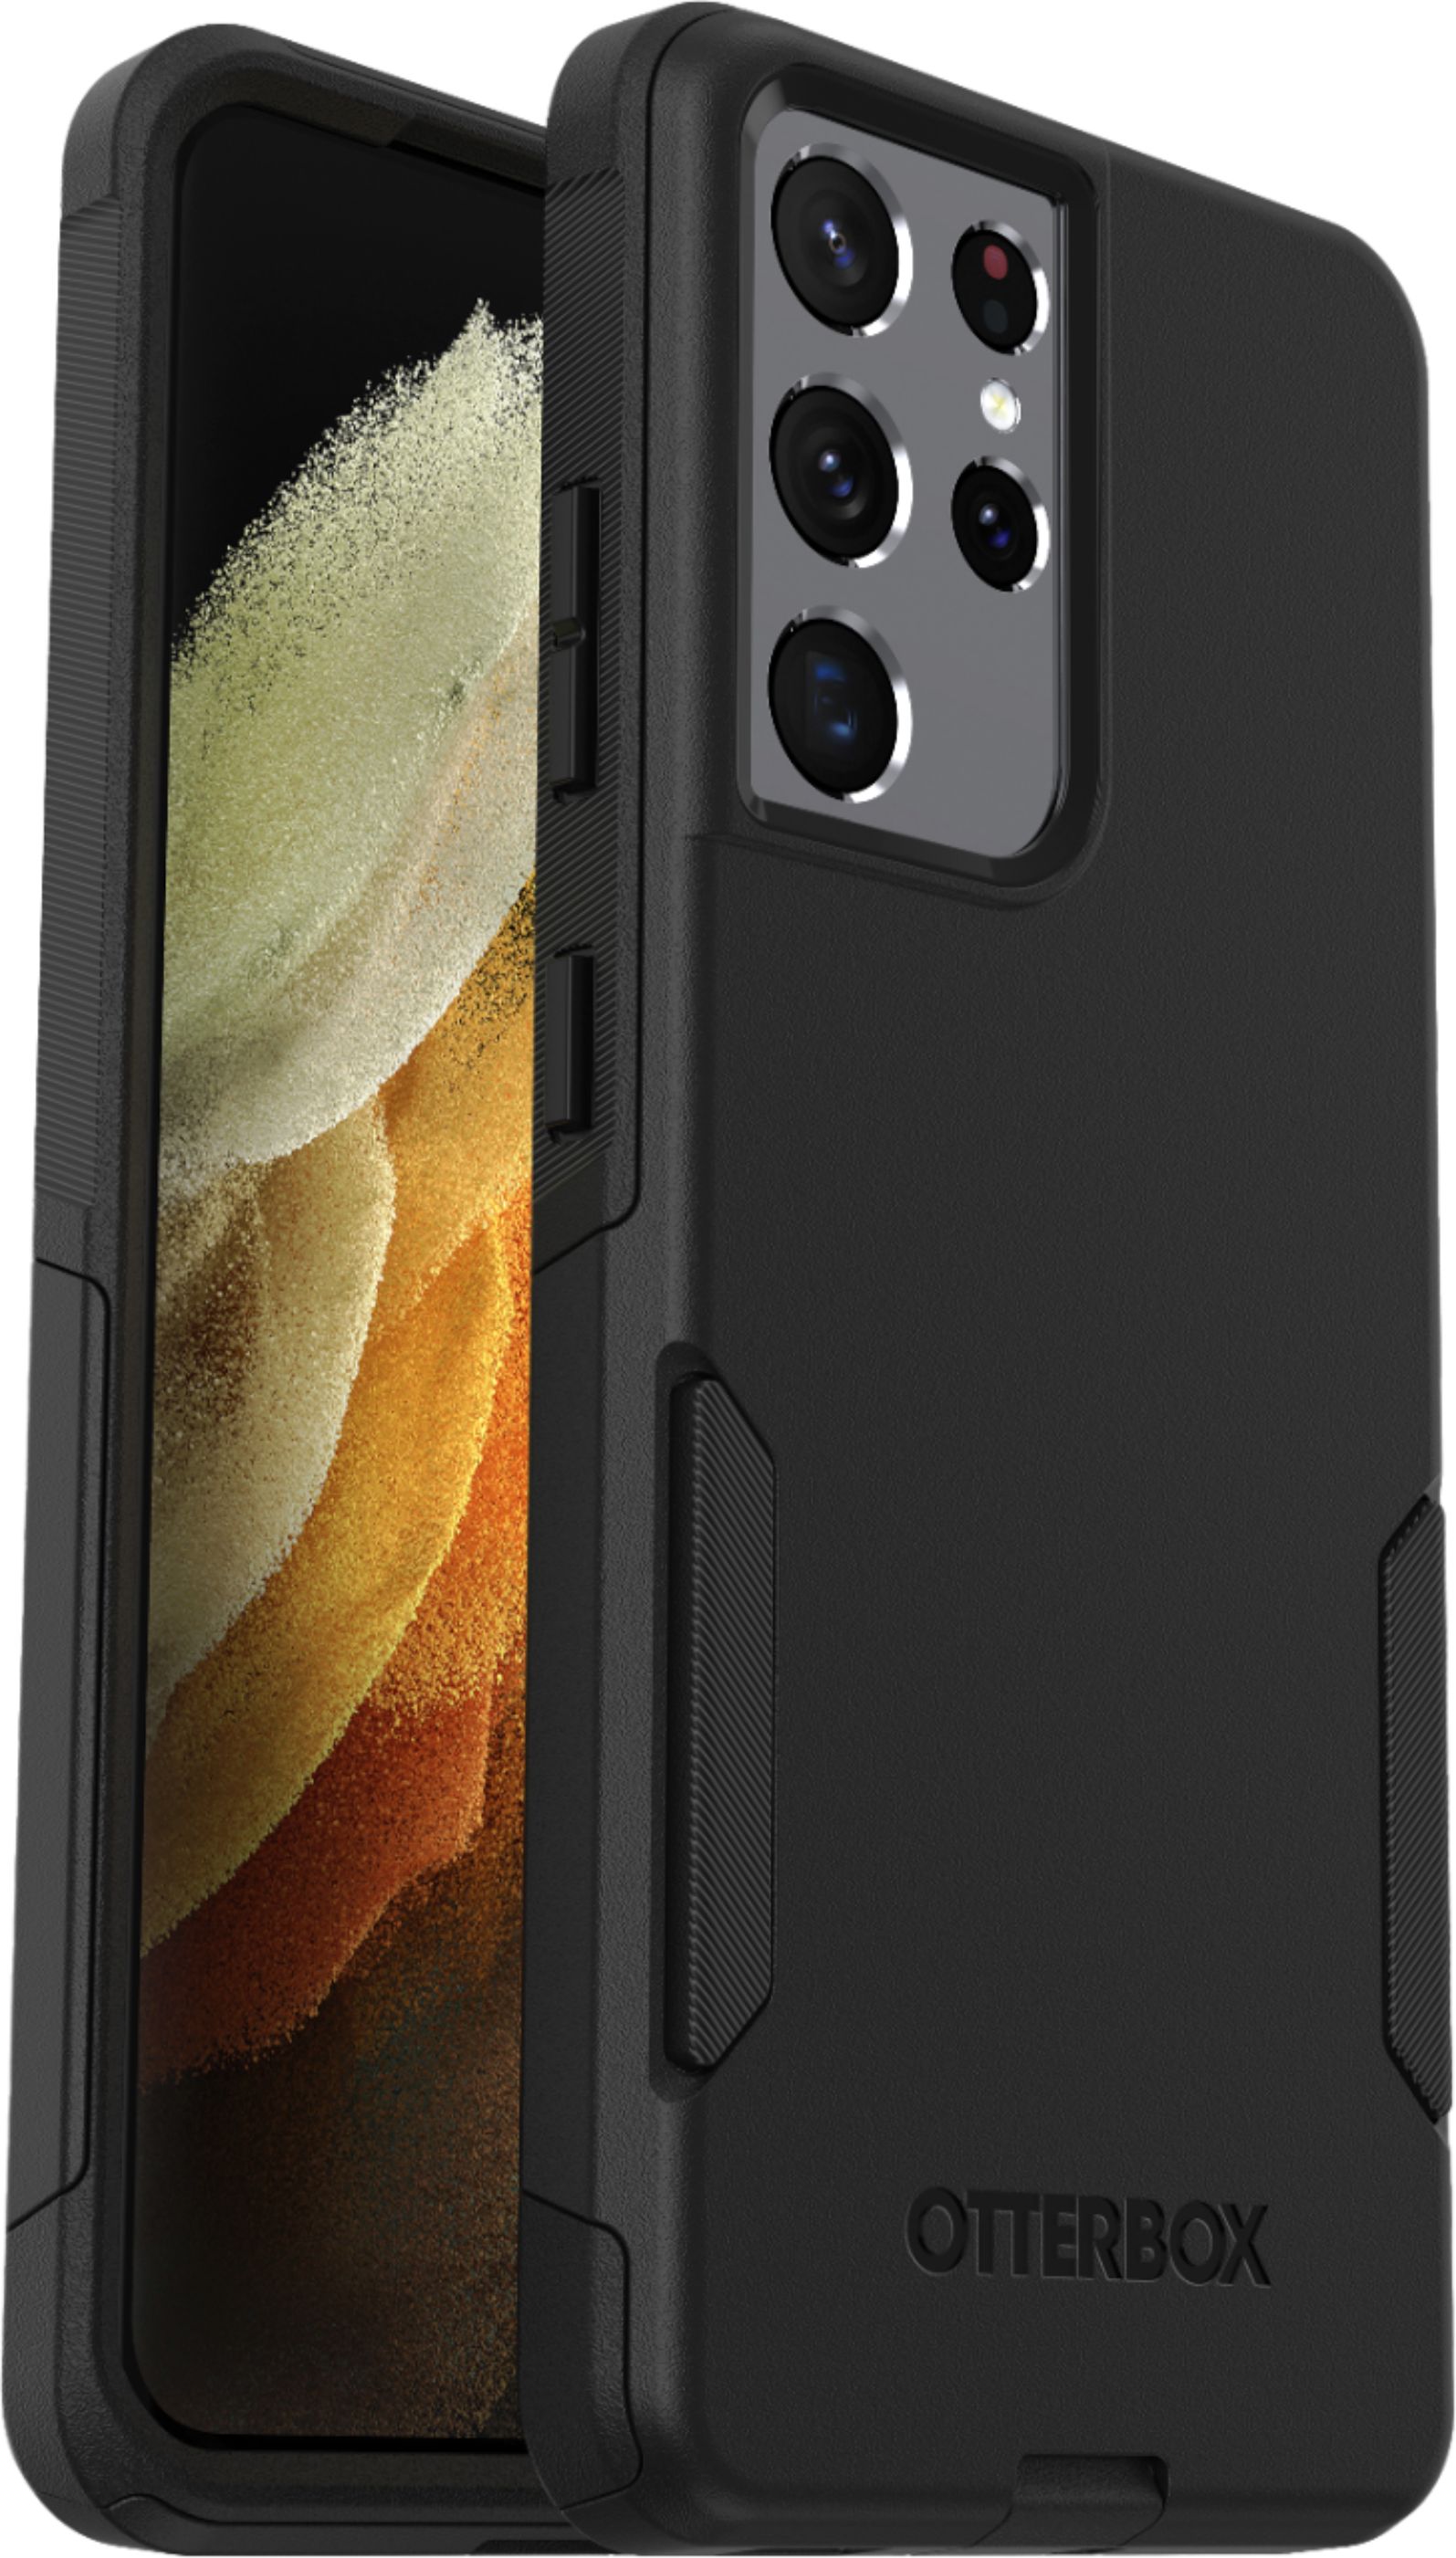 Angle View: OtterBox - Commuter Series for Samsung Galaxy S21 Ultra 5G - Black